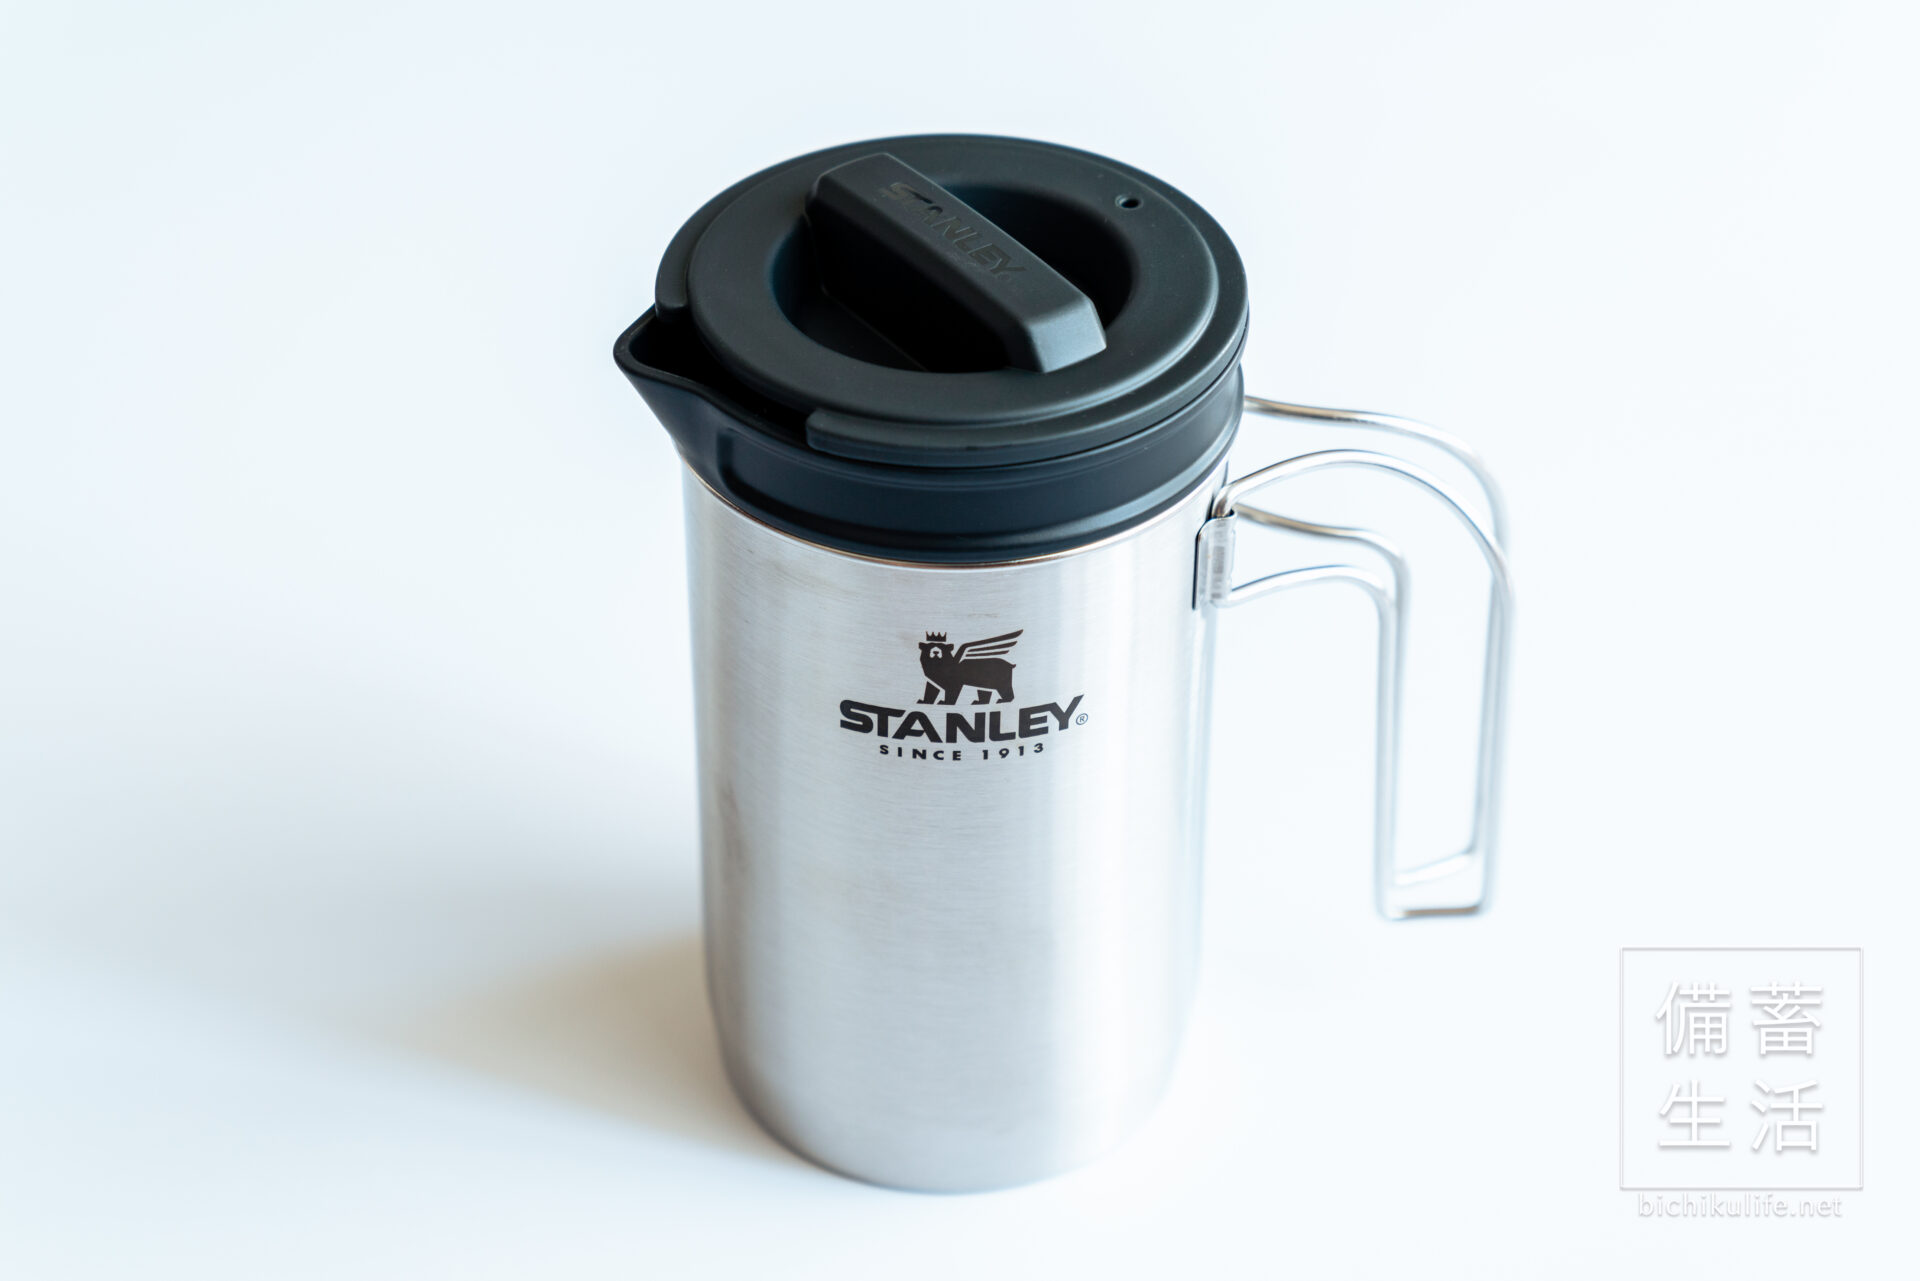 Stanley Adventure All-in-One Boil + Brew French Press